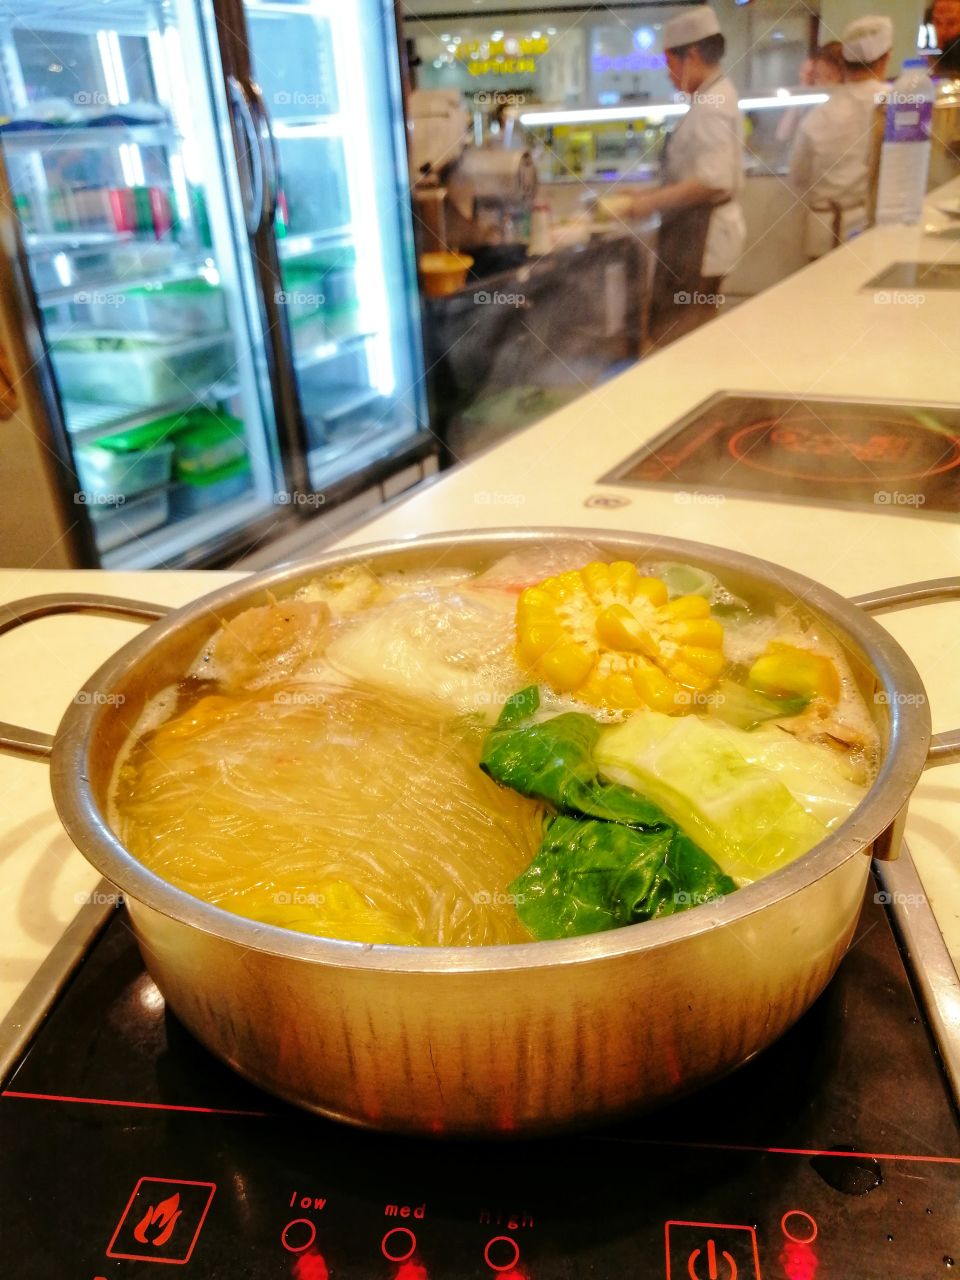 Steaming hot vegetable noodle soup freshly cooked in a restaurant.